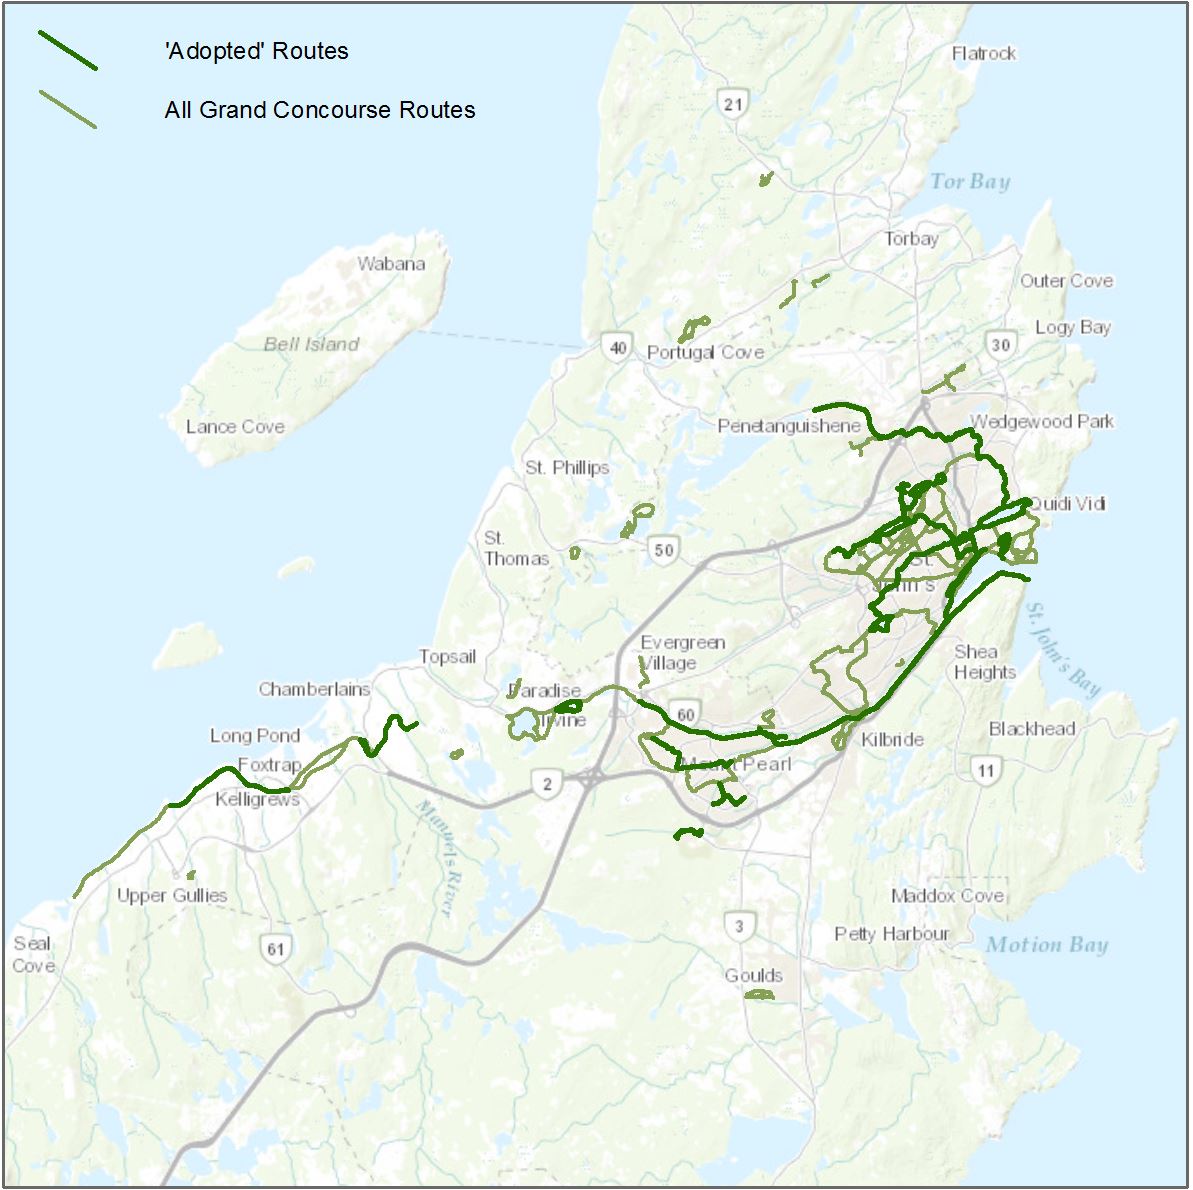 Adopted routes as of October 31, 2017